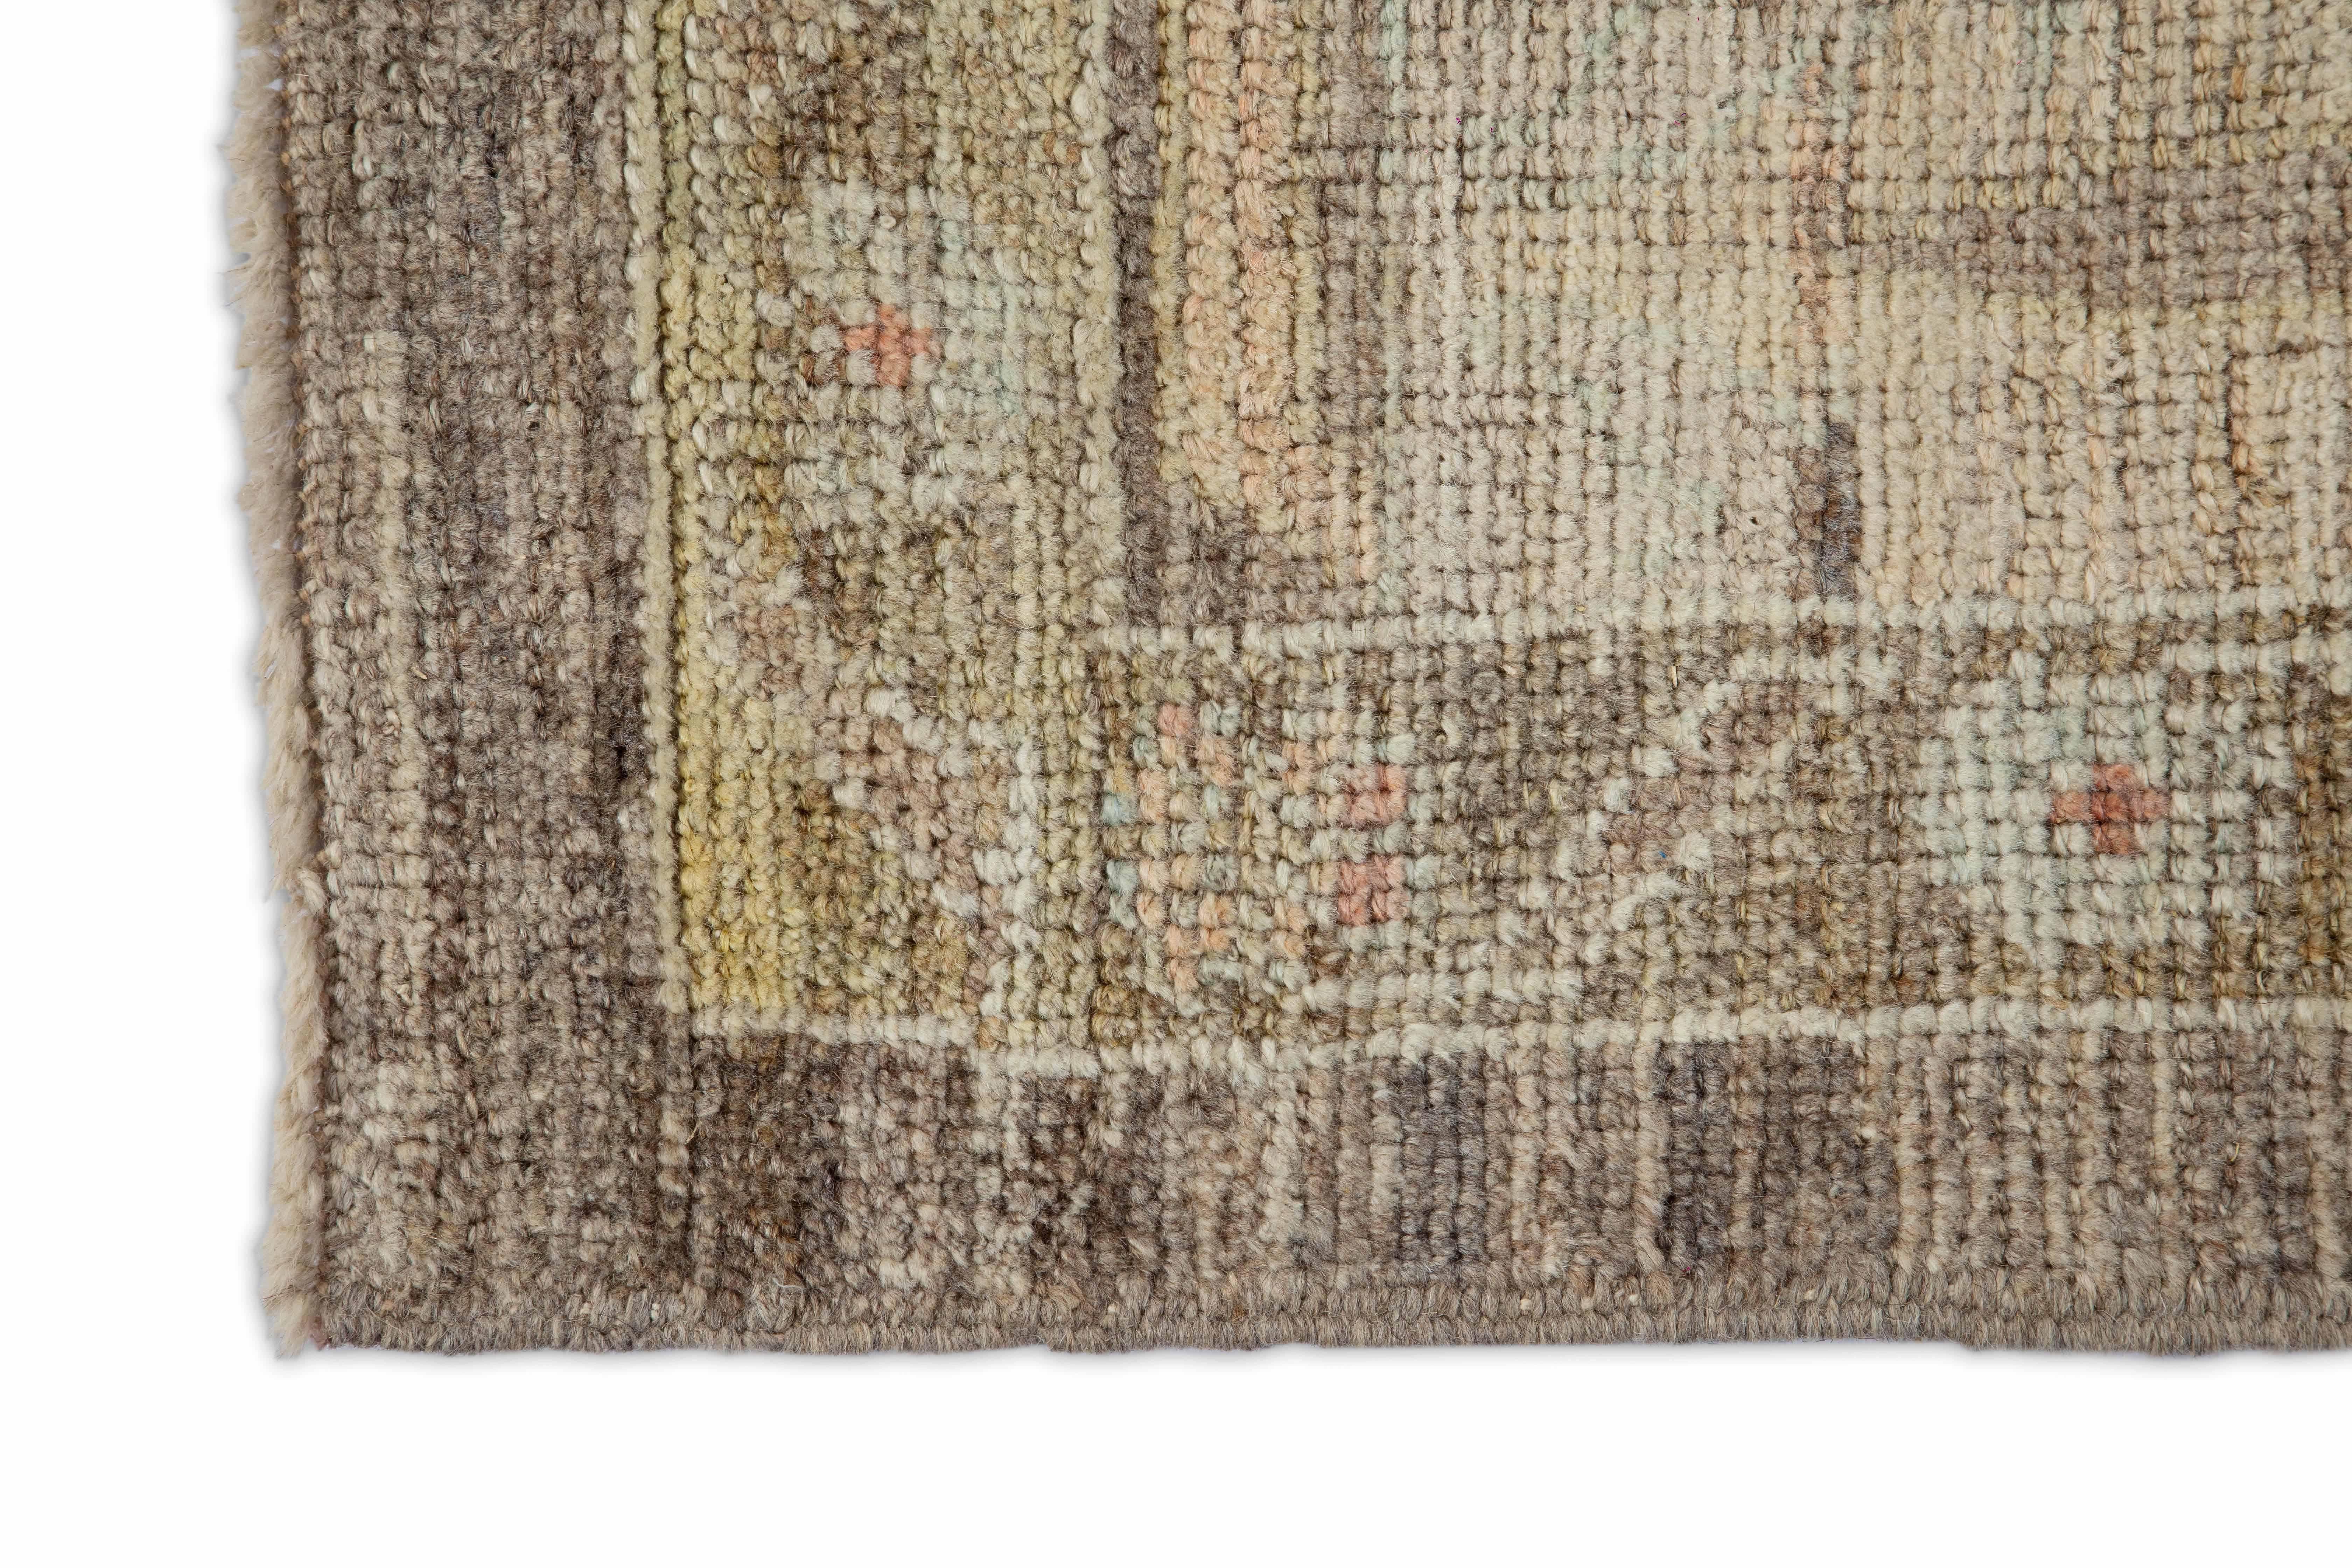 Modern Turkish area rug made of handwoven sheep’s wool of the finest quality. It’s colored with organic vegetable dyes that are certified safe for humans and pets alike. It features a brown field with dense floral patterns in pink, beige and blue